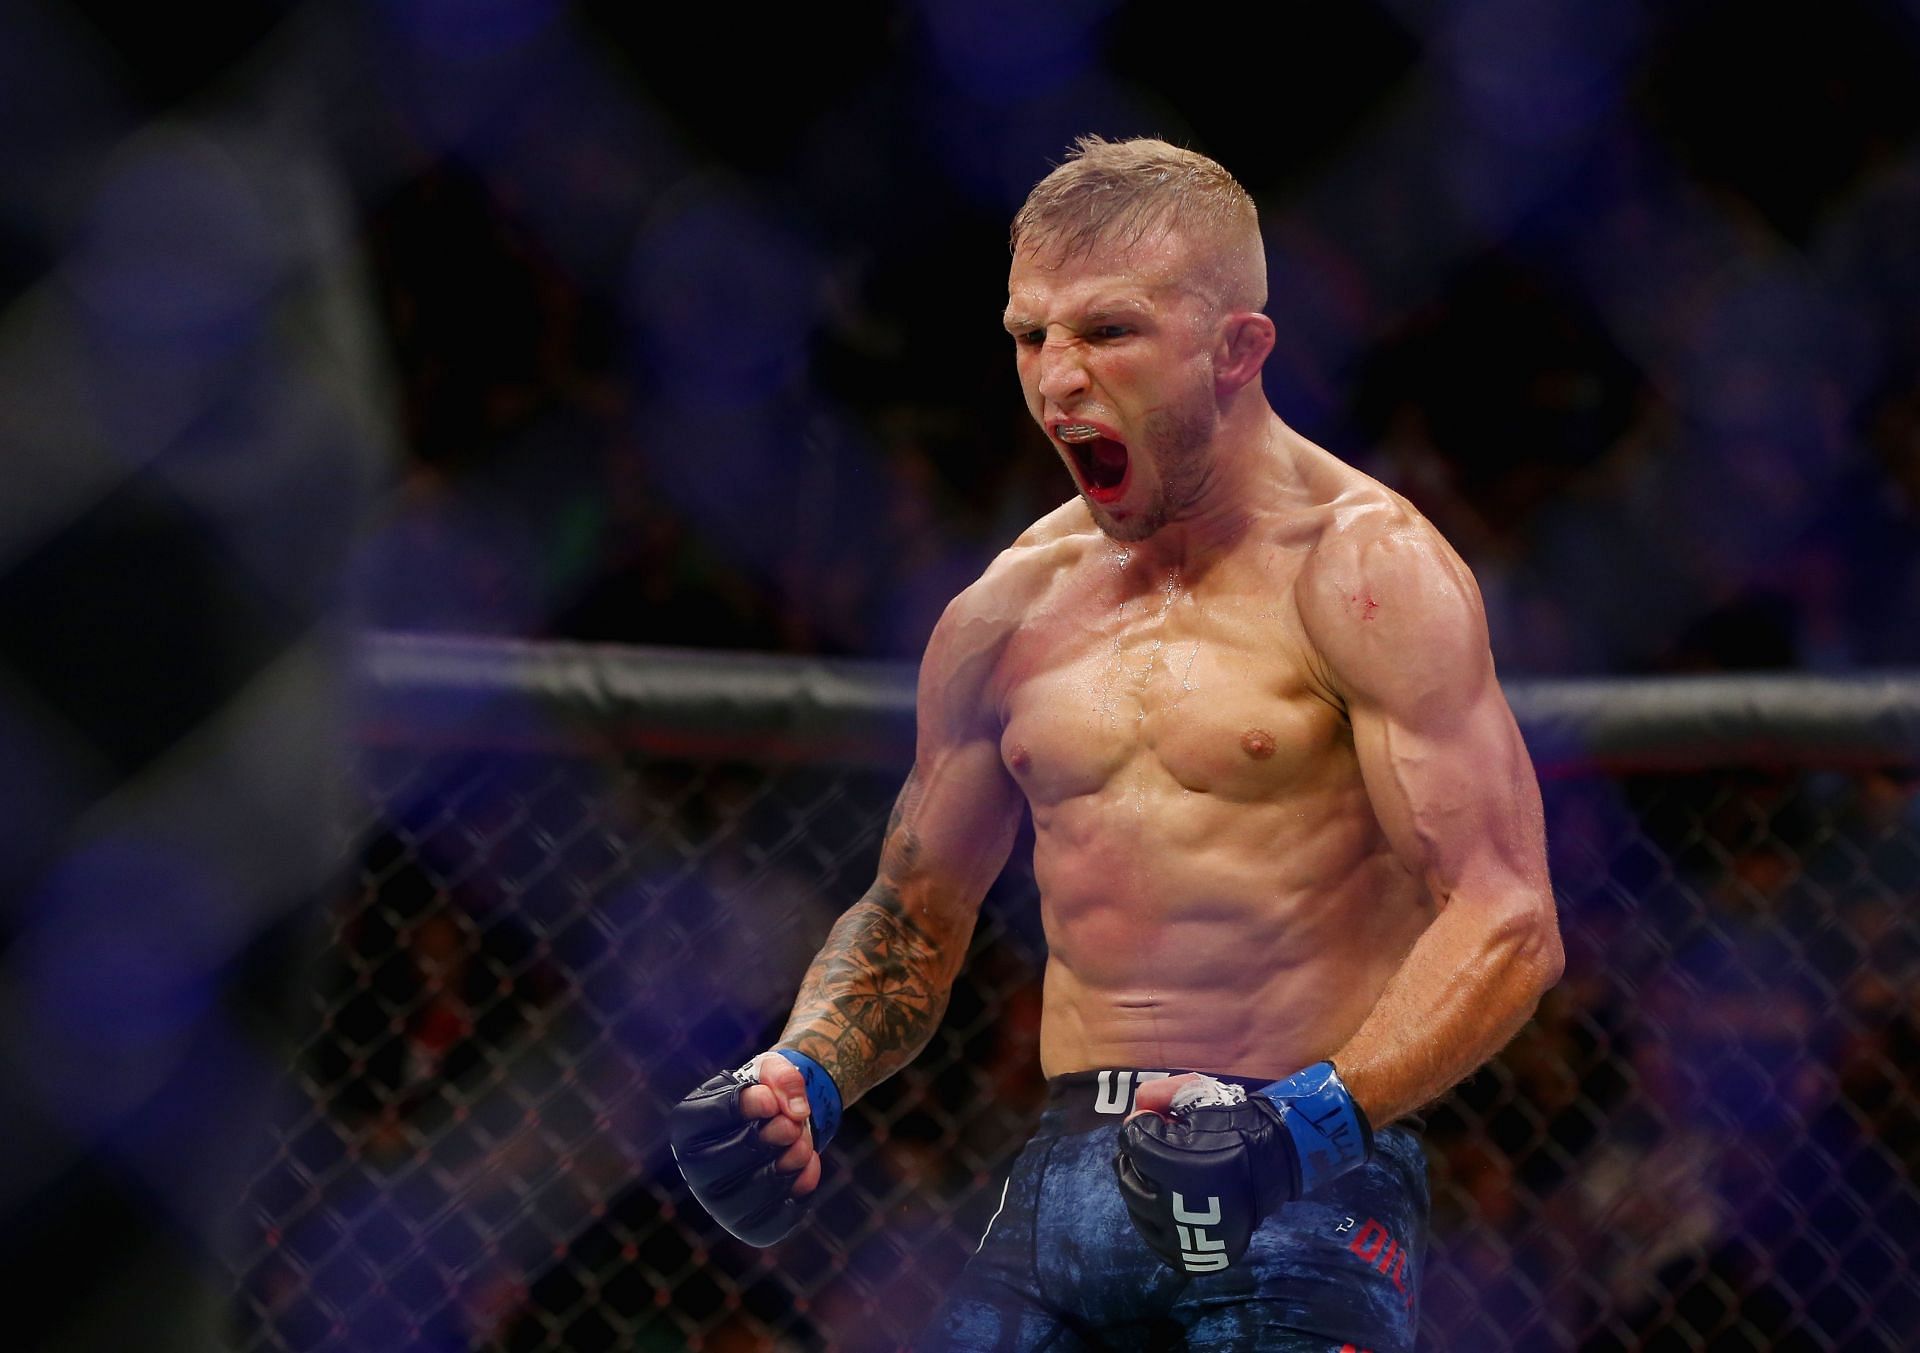 TJ Dillashaw appears to be next in line for Aljamain Sterling